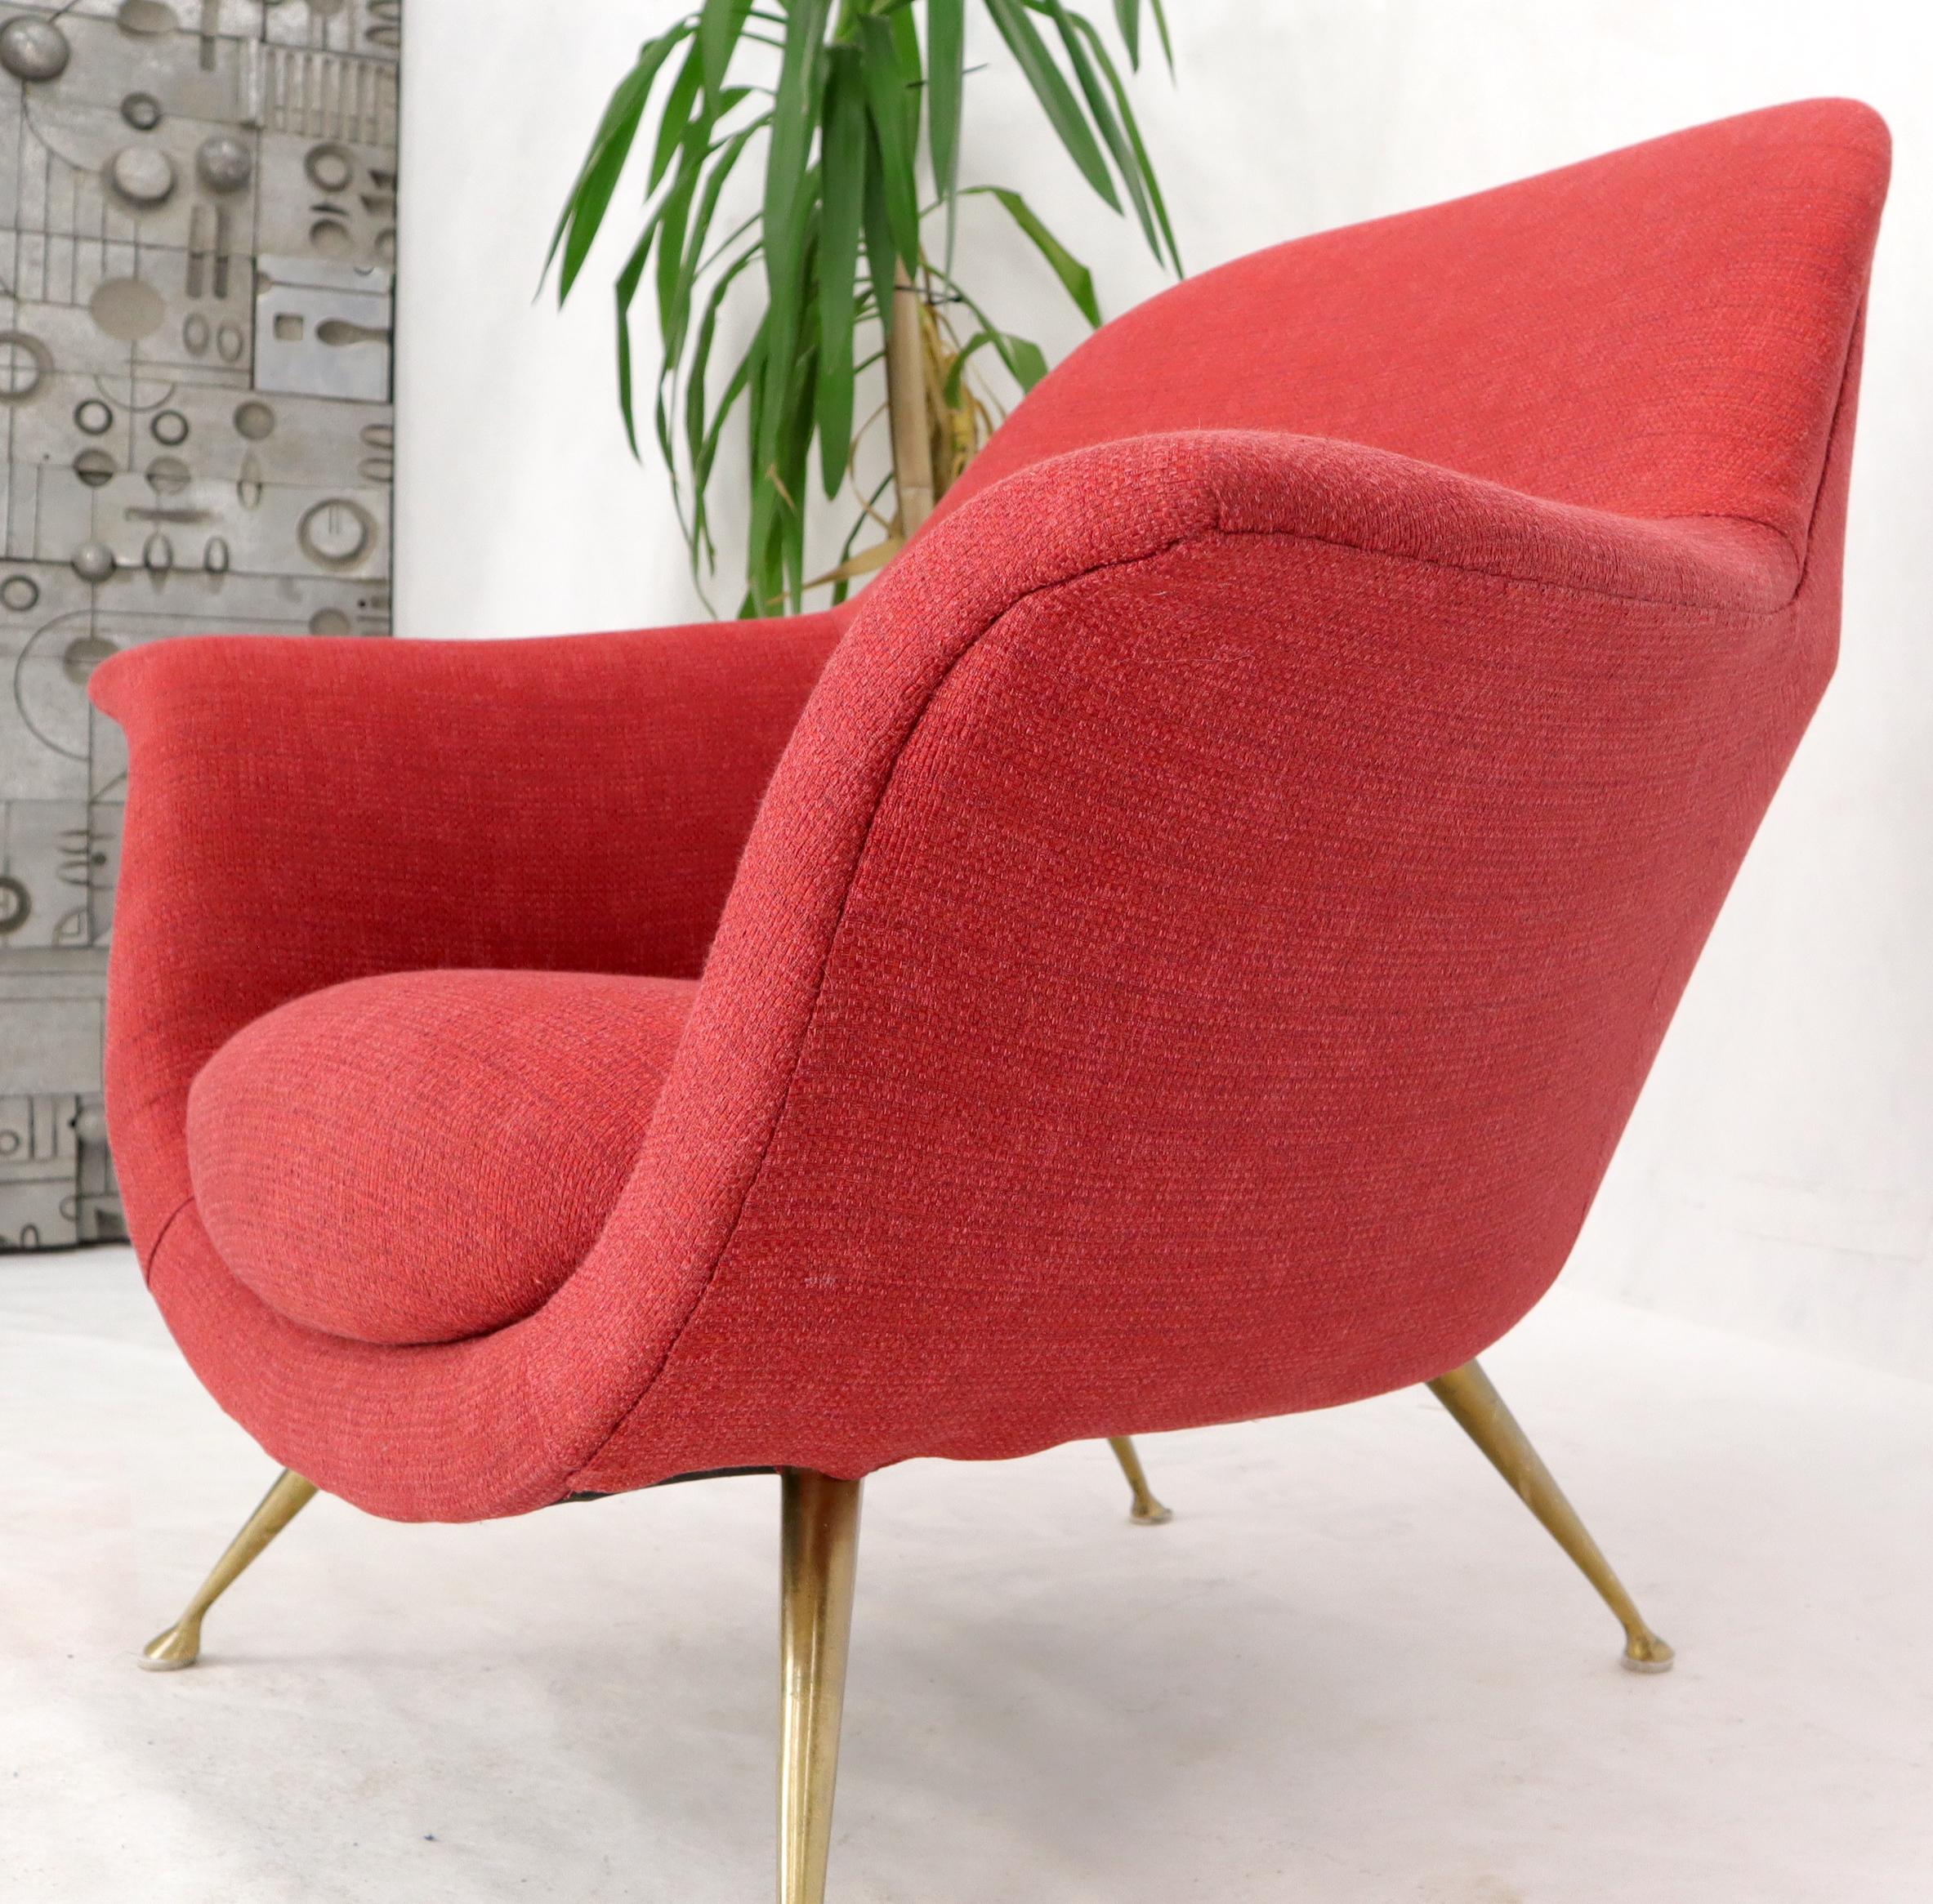 Italian Mid-Century Modern New Red Upholstery Lounge Chair on Solid Brass Legs For Sale 4